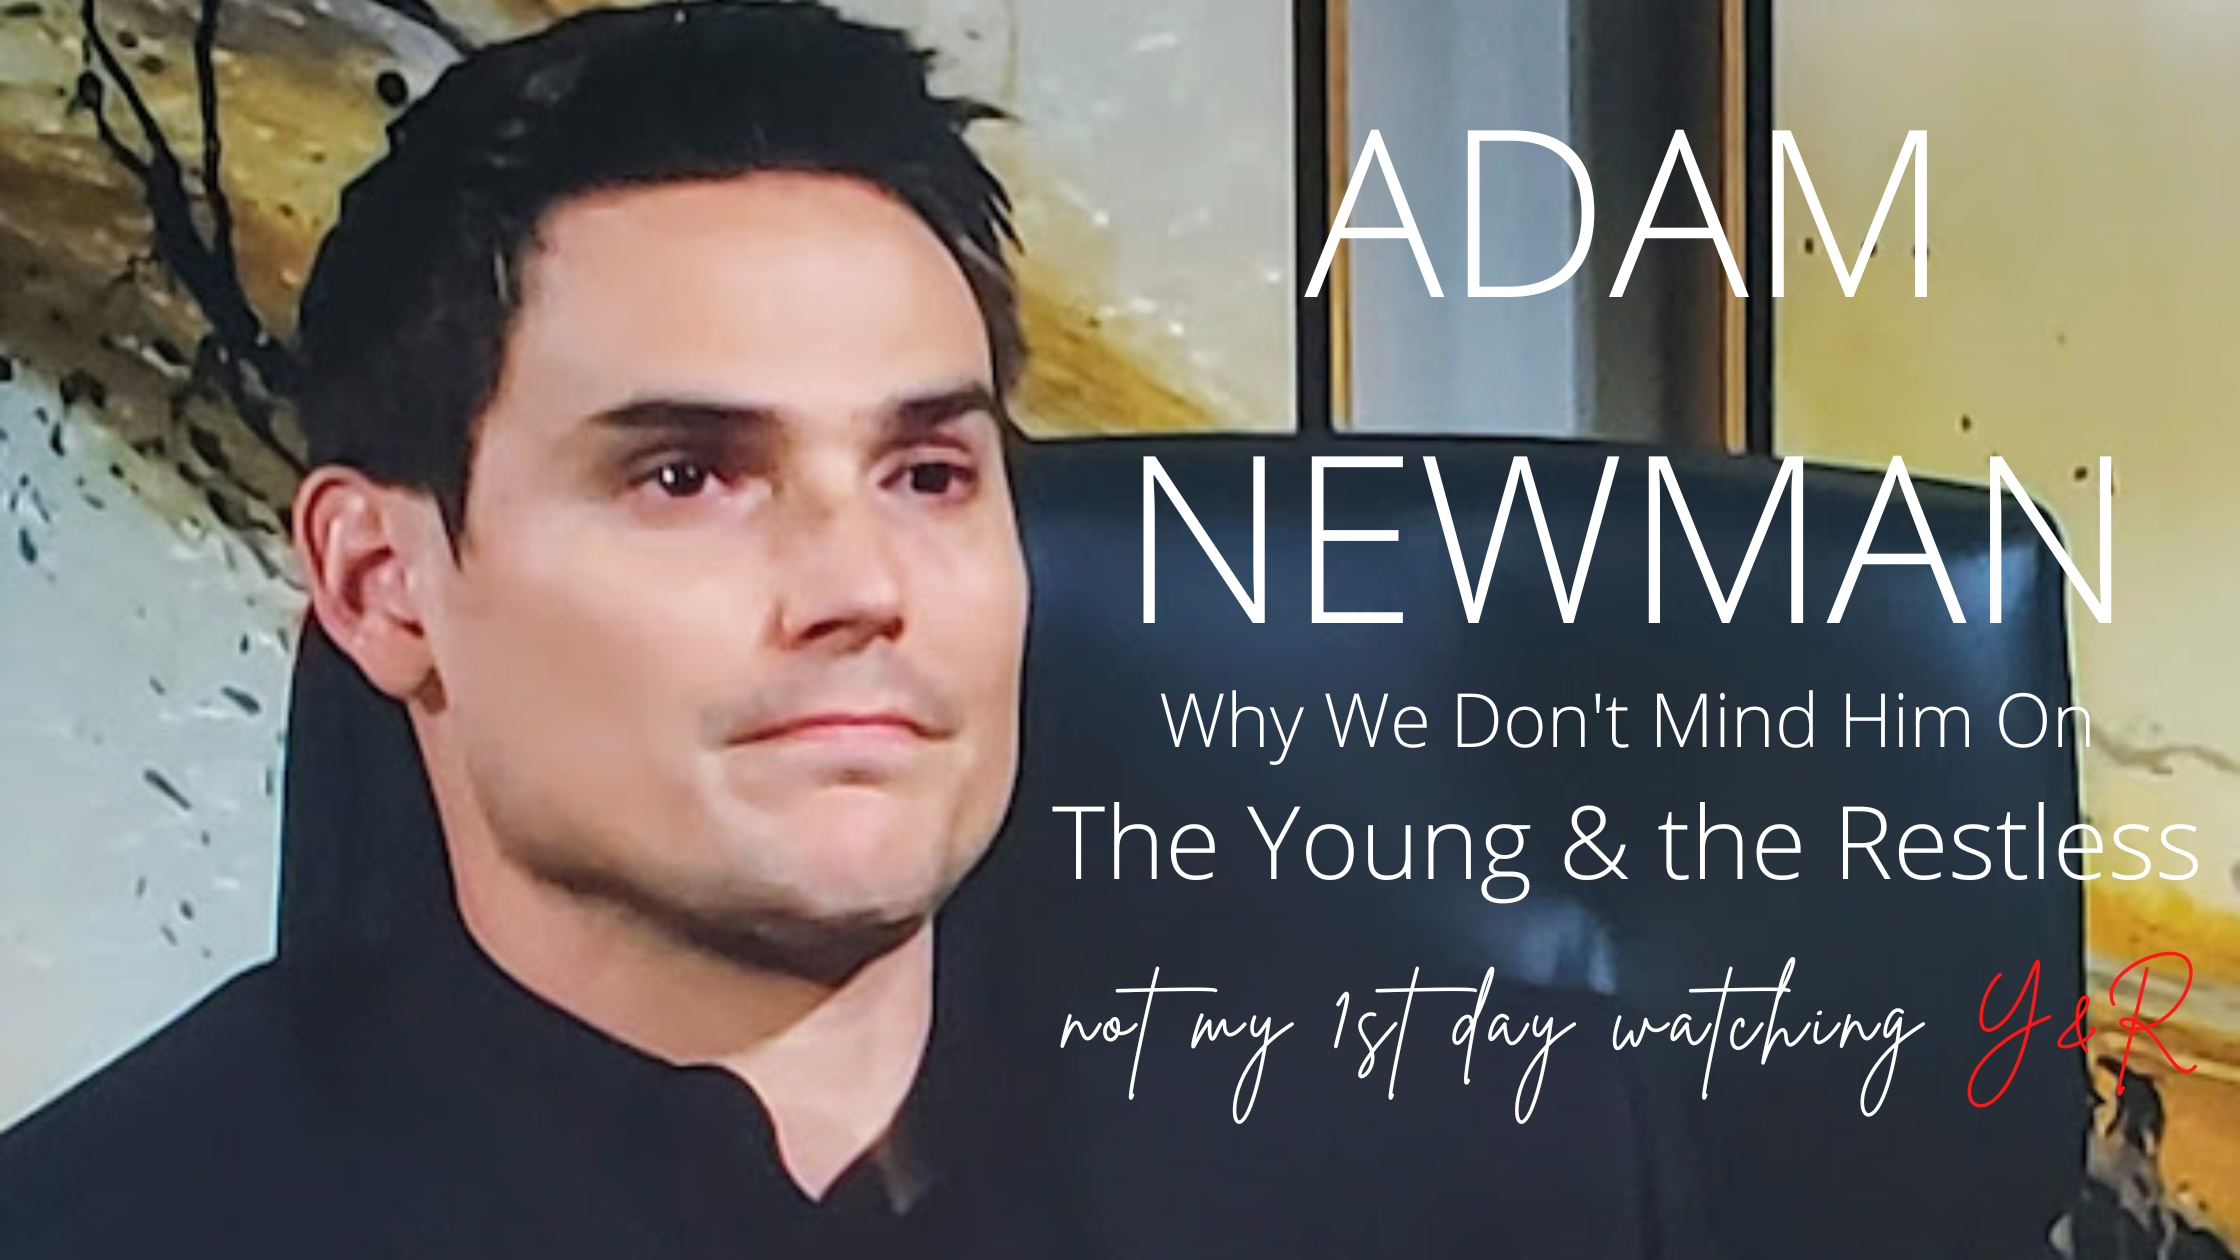 Why We Don't Mind Adam Newman on The Young & the Restless